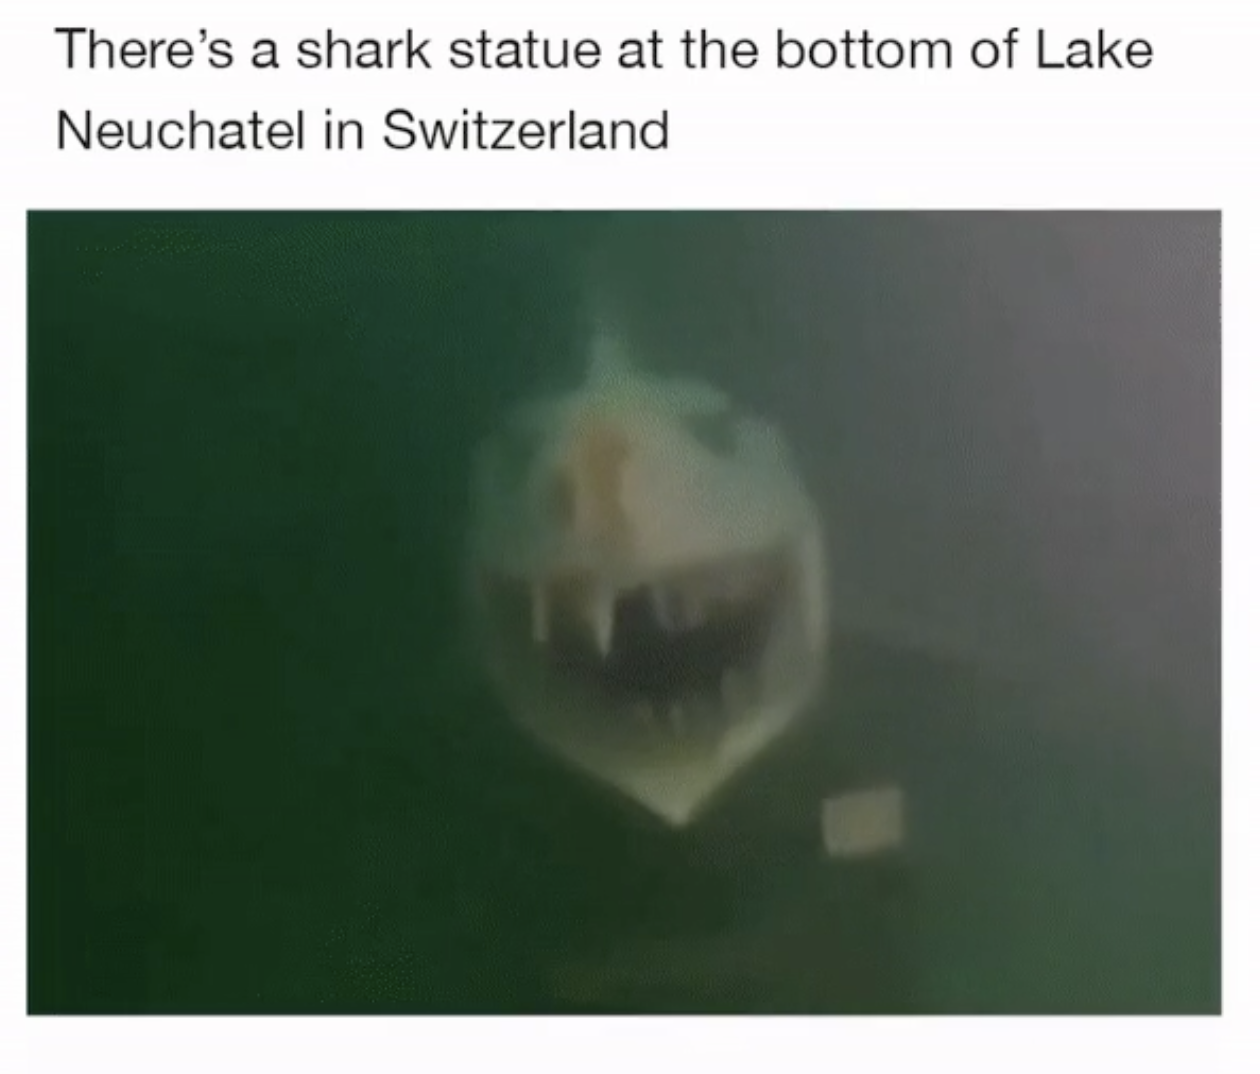 jaw - There's a shark statue at the bottom of Lake Neuchatel in Switzerland